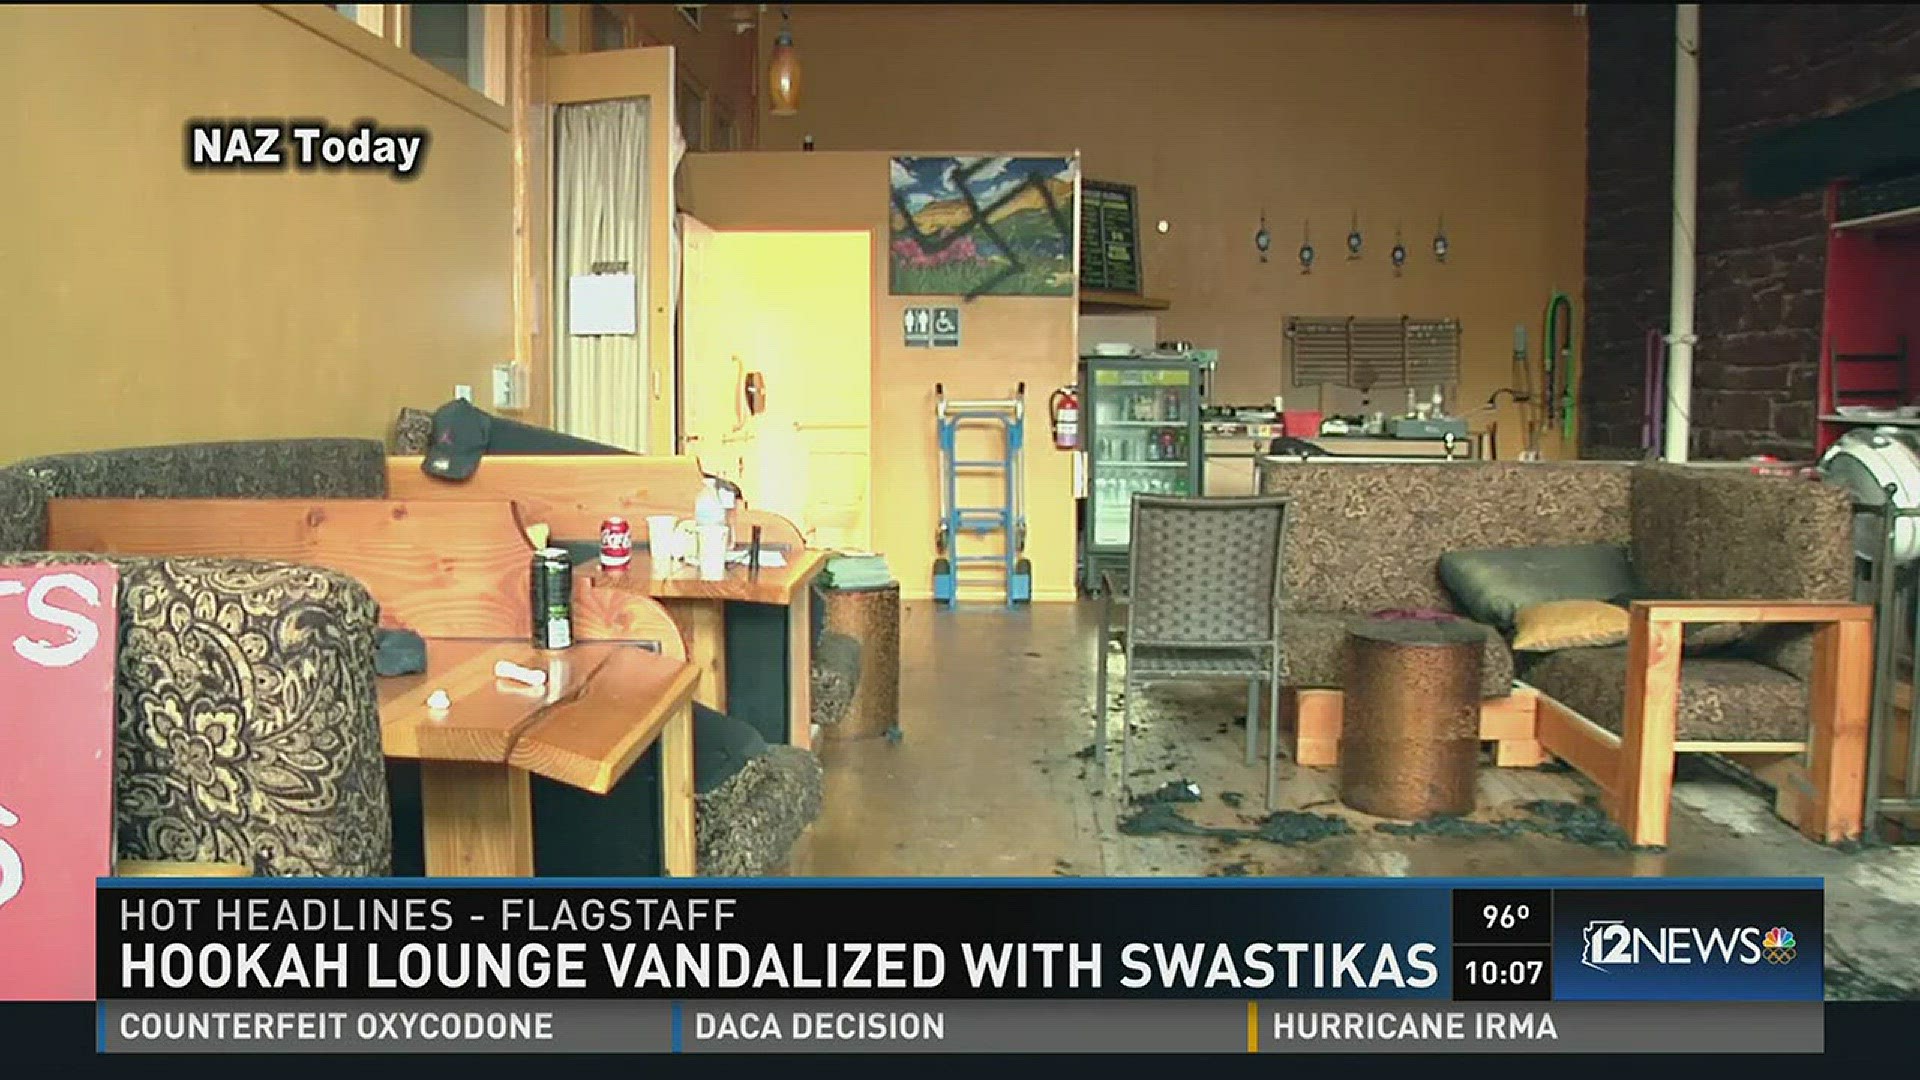 Lounge owners took to a GoFundMe account to restore damage from vandals who spray painted the Maktoob Hookah Lounge with swastikas.